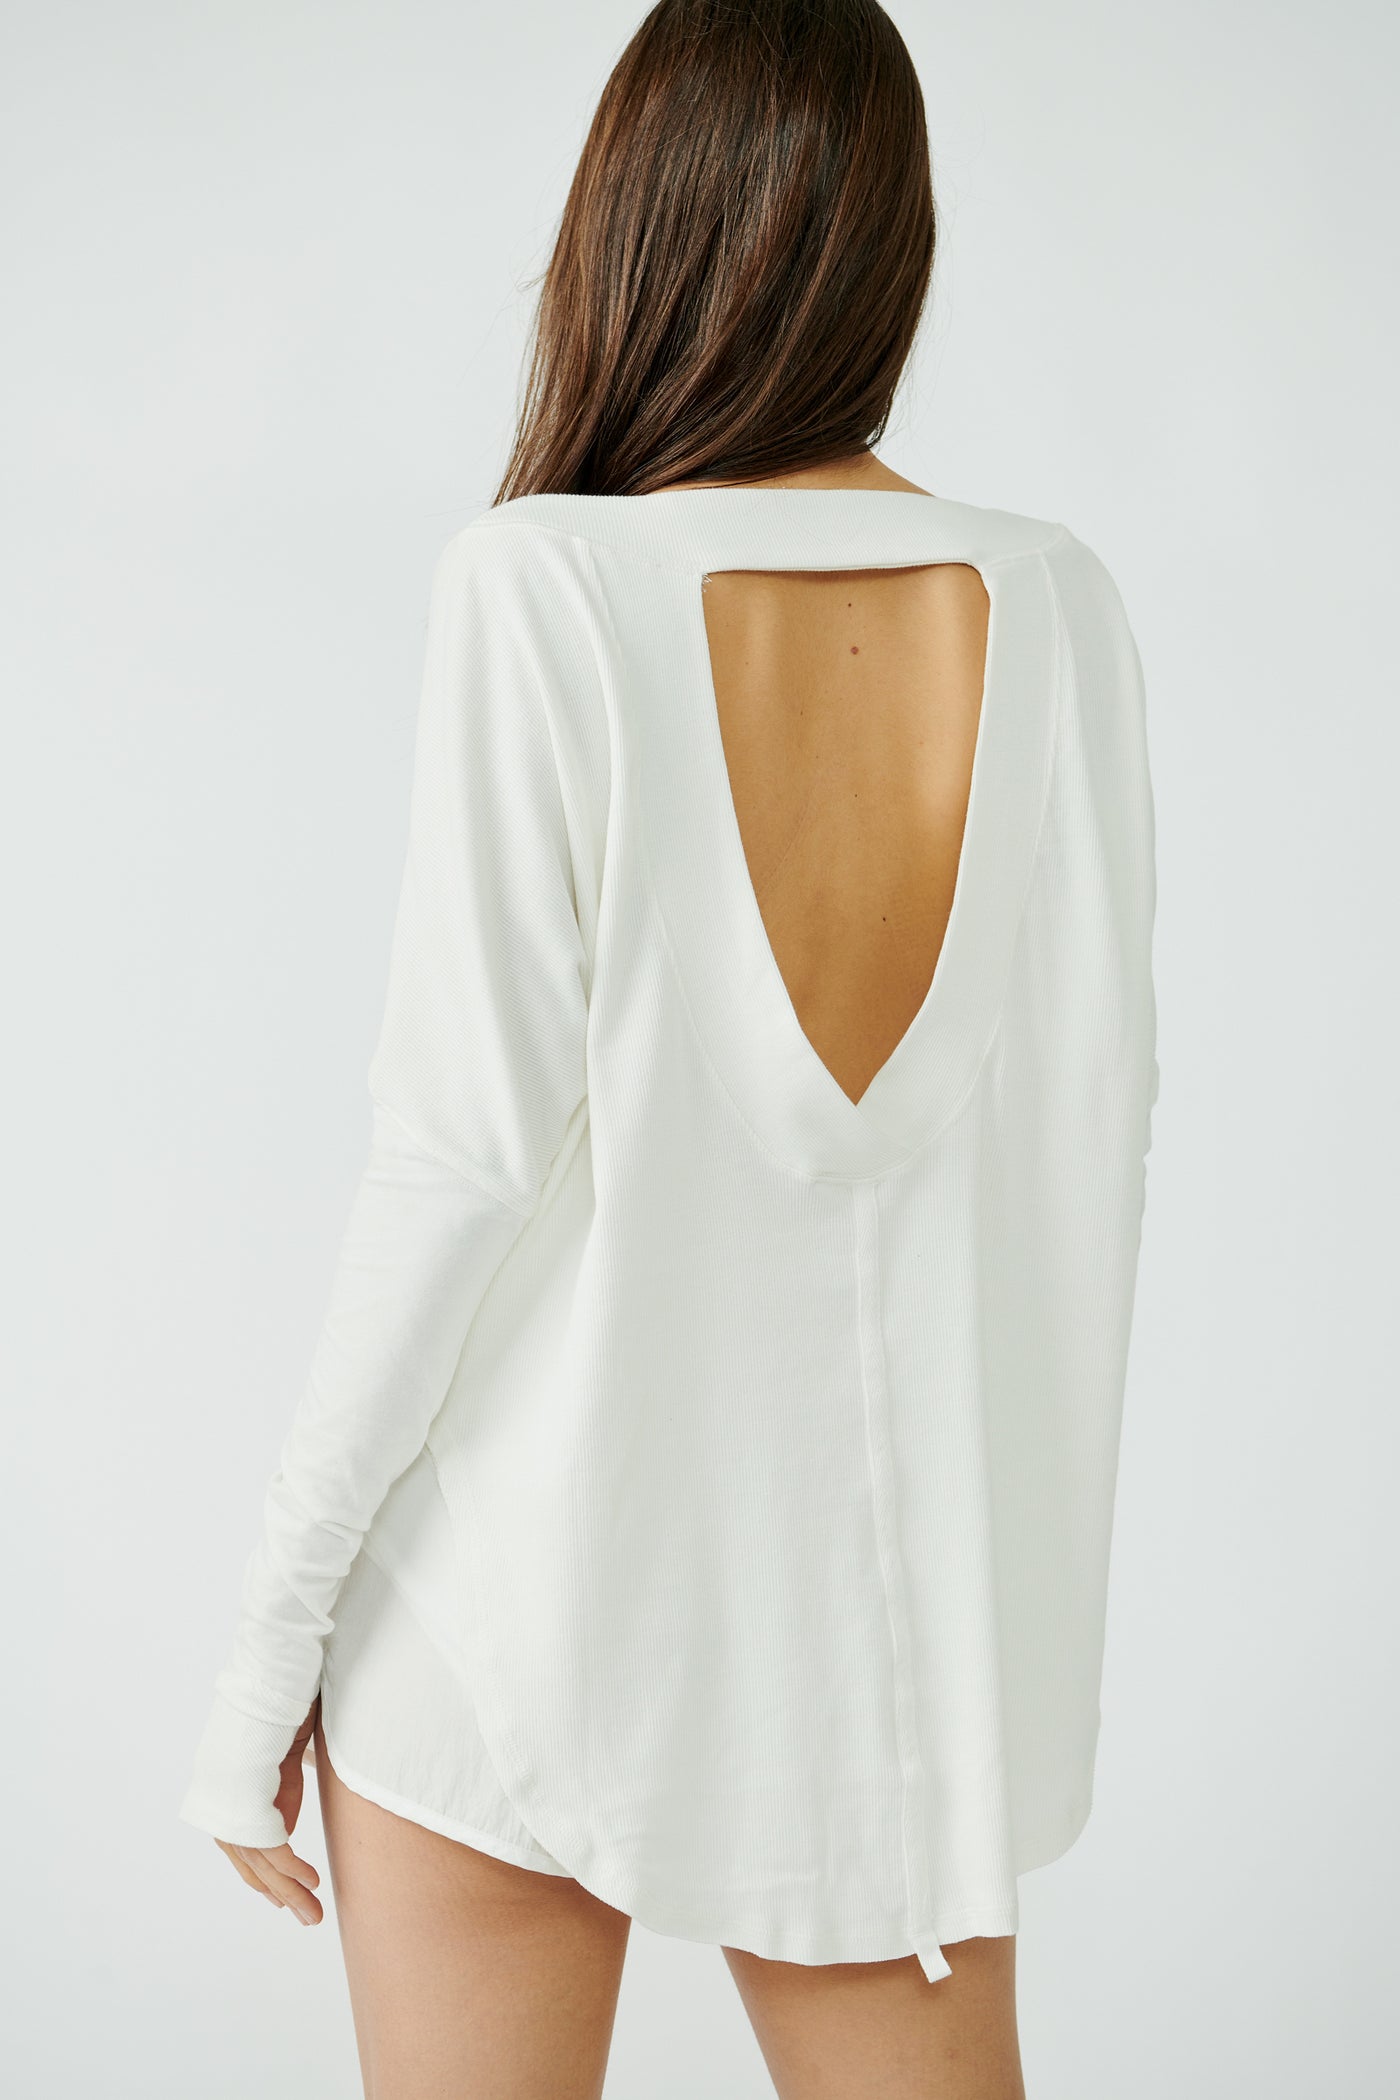 Free People Simply Later - Ivory